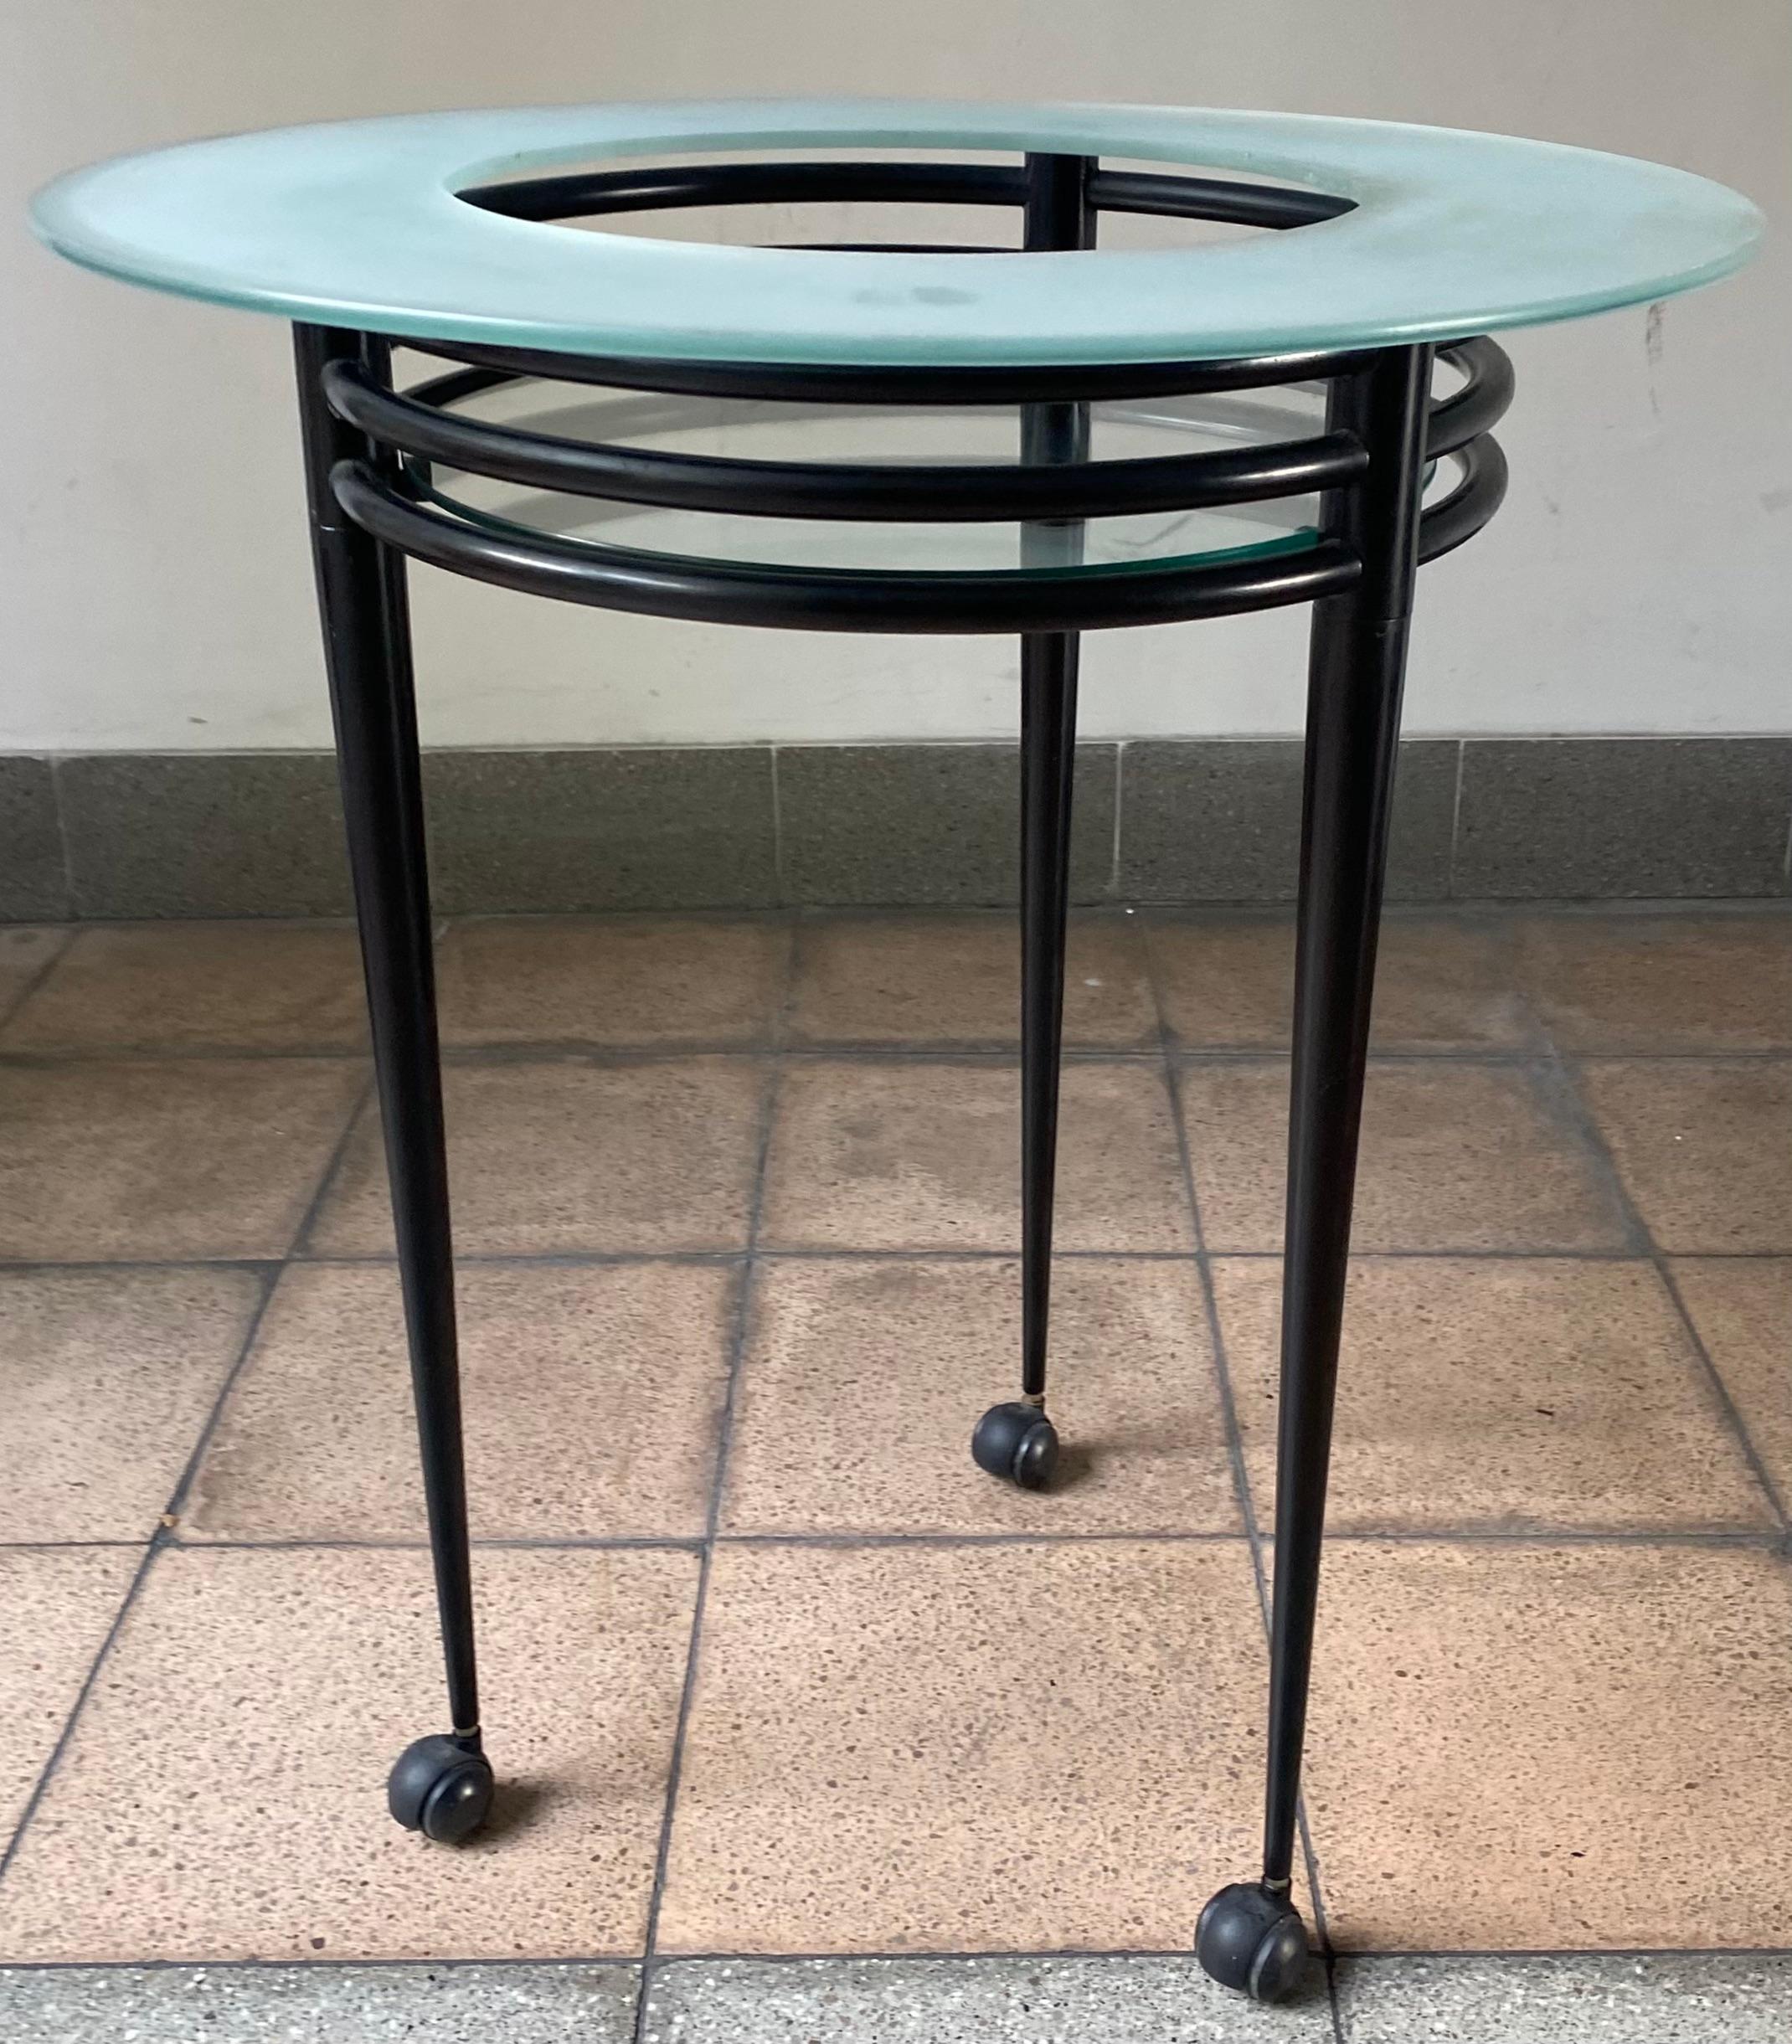 Pedestal table on wheels by Pascal Mourgue.
Artelano edition. 
Sandblasted glass top and steel legs.
Model luna atlantique. 
Measures: Ø 65 cm x H 76 cm. 

A graduate of the Ecole Boulle, Mourgue is more than just a great designer who has